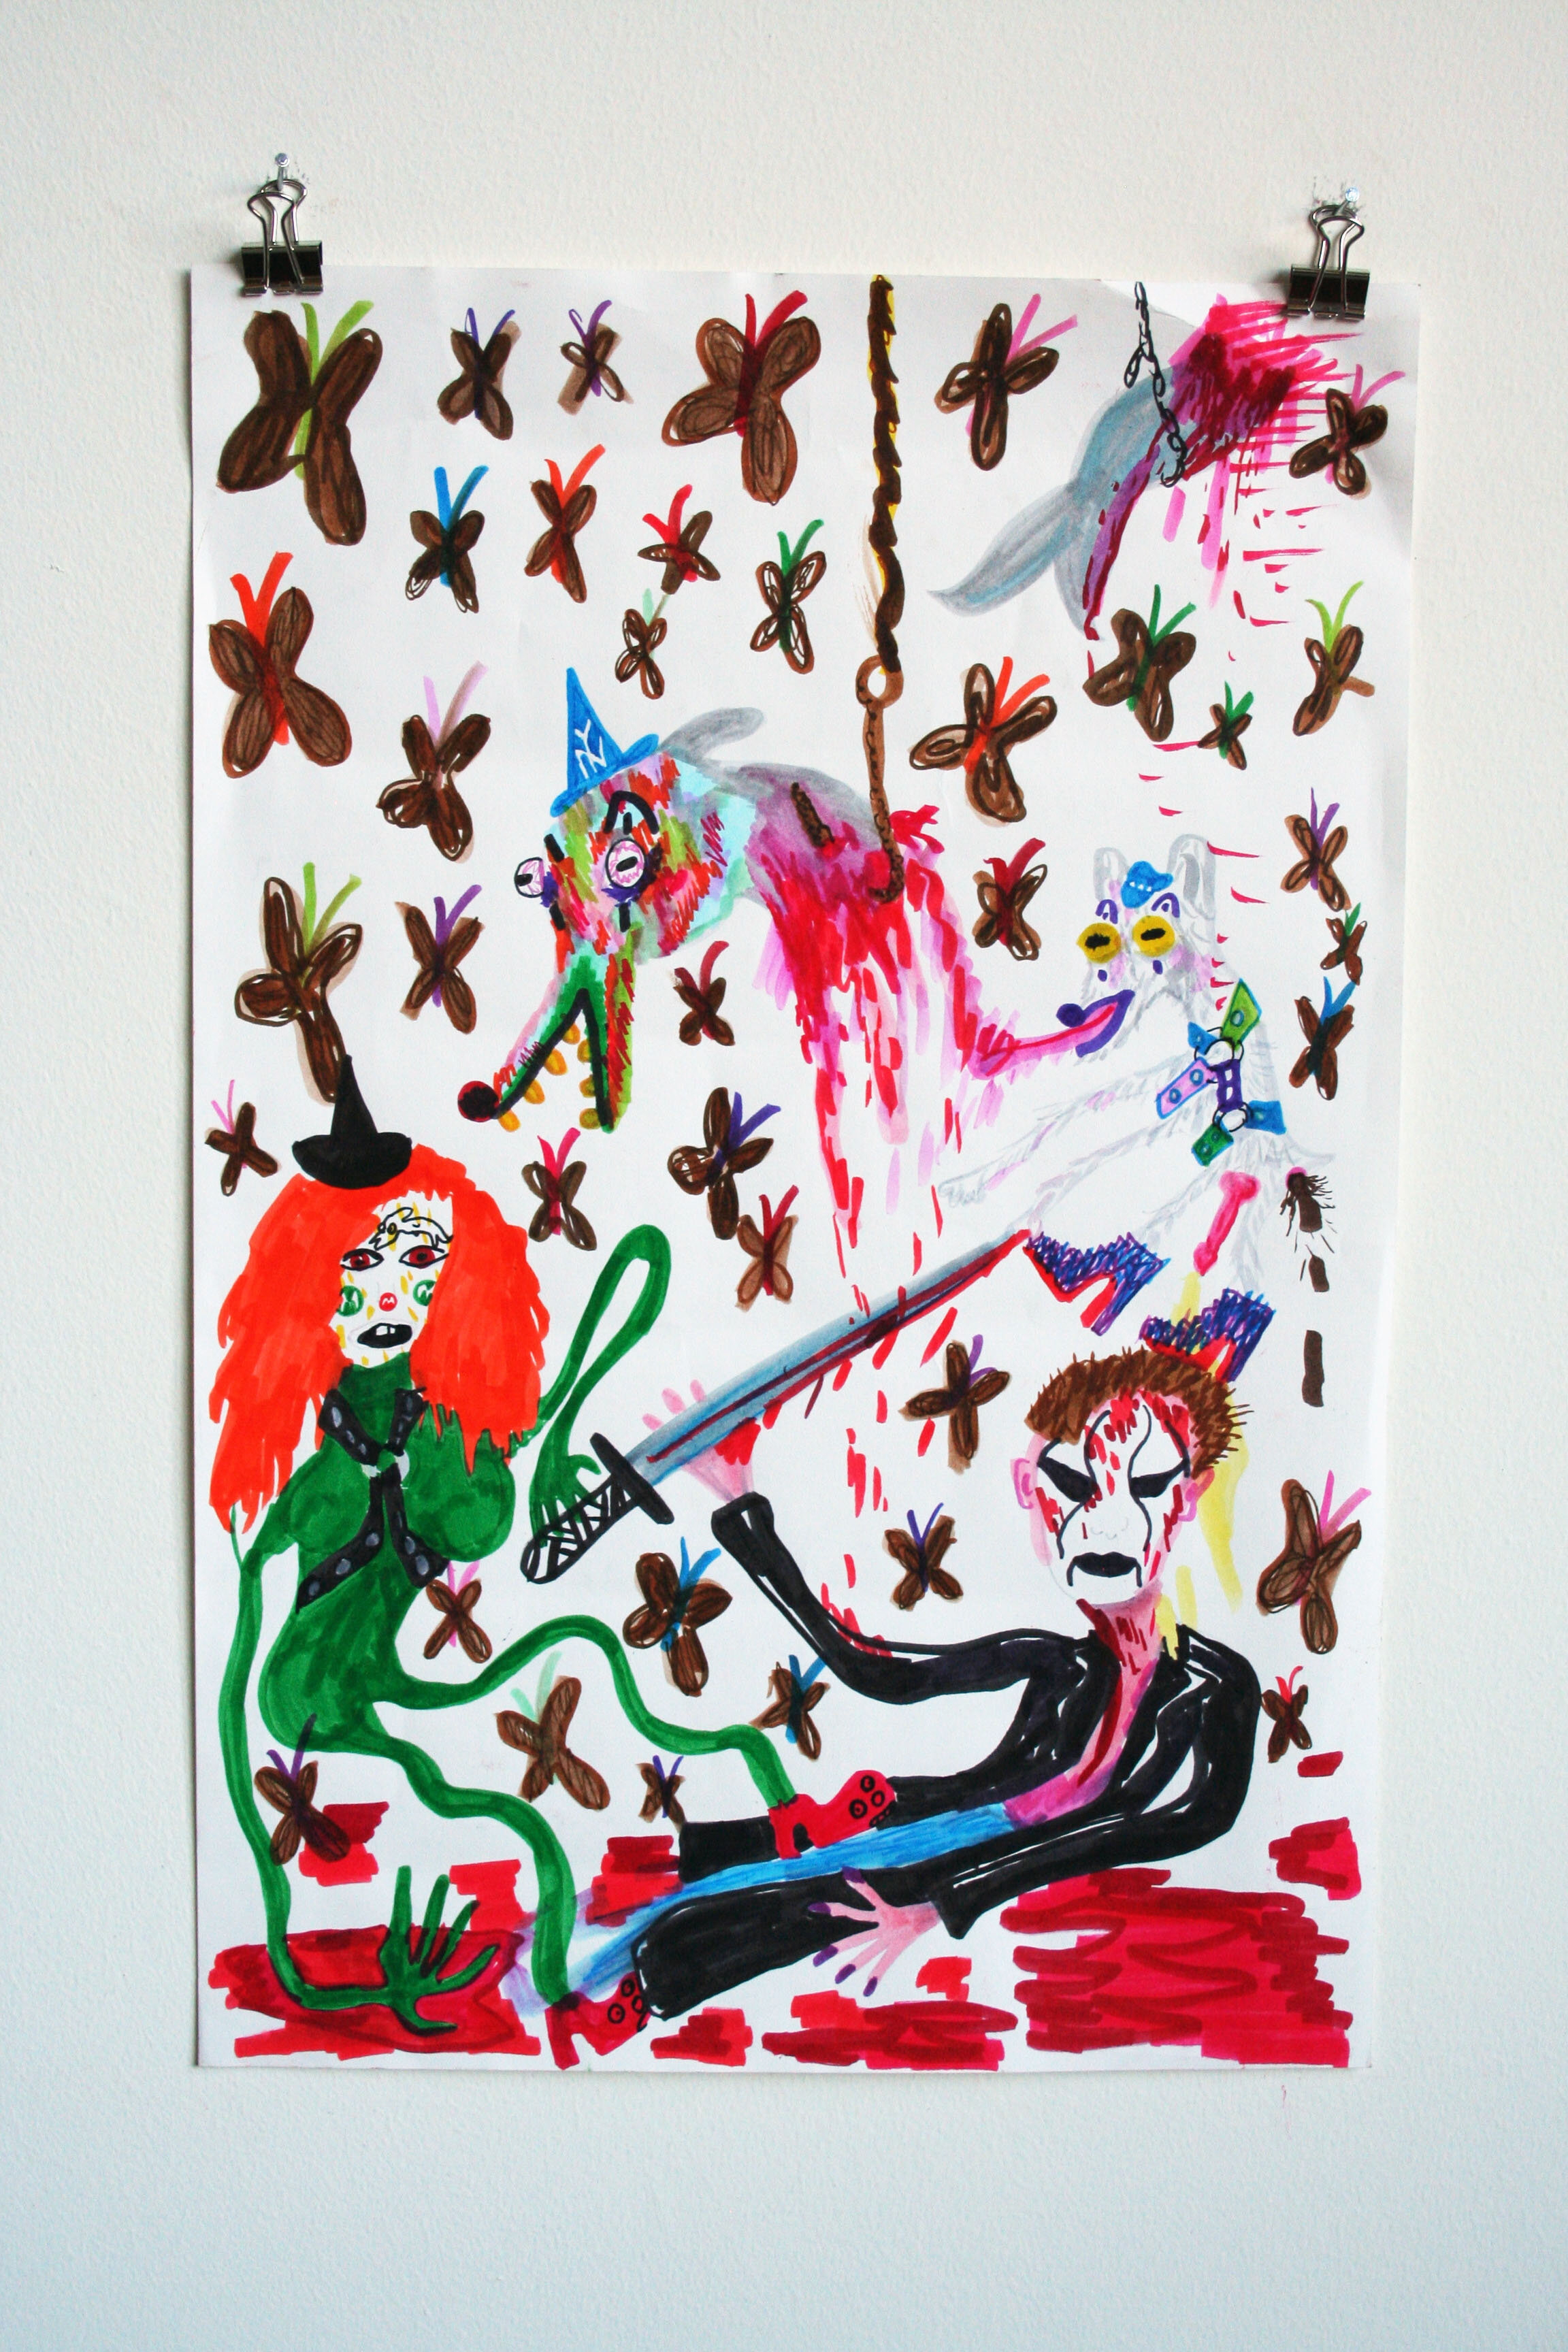   Old Put and Sting Fantasy Match,  2015  18 x 12 inches (45.72 x 30.48 cm.)  Marker on paper 